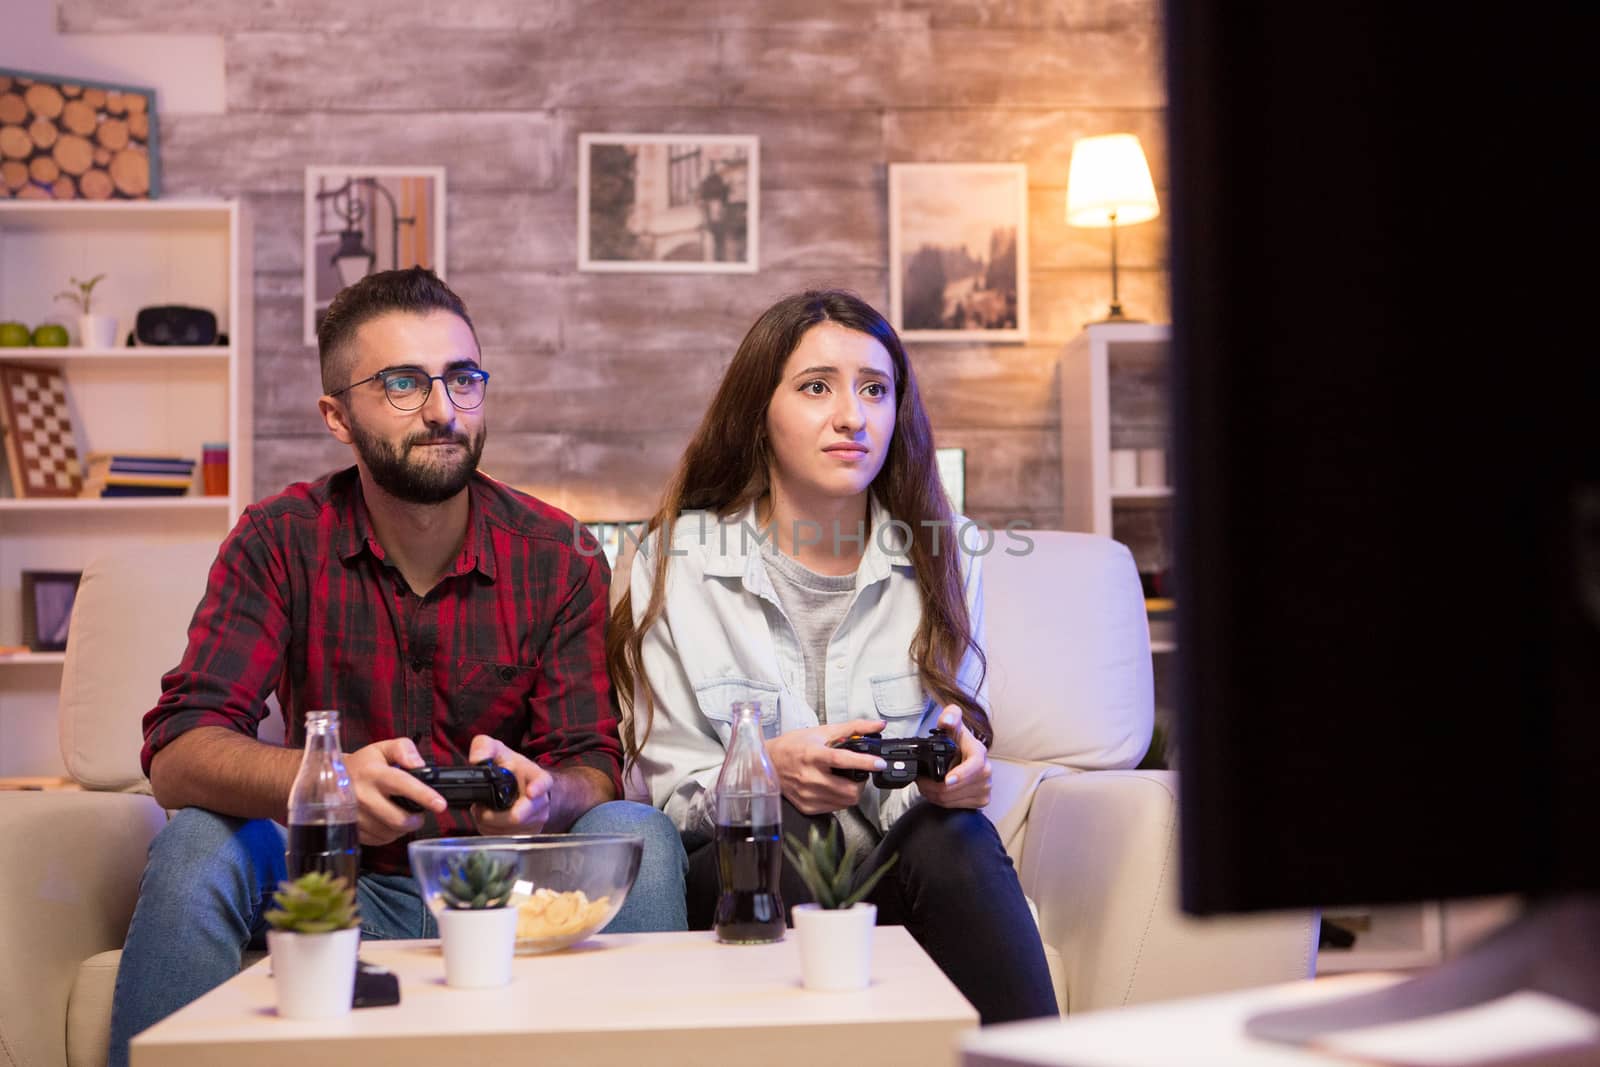 Couple playing video games on television at night by DCStudio